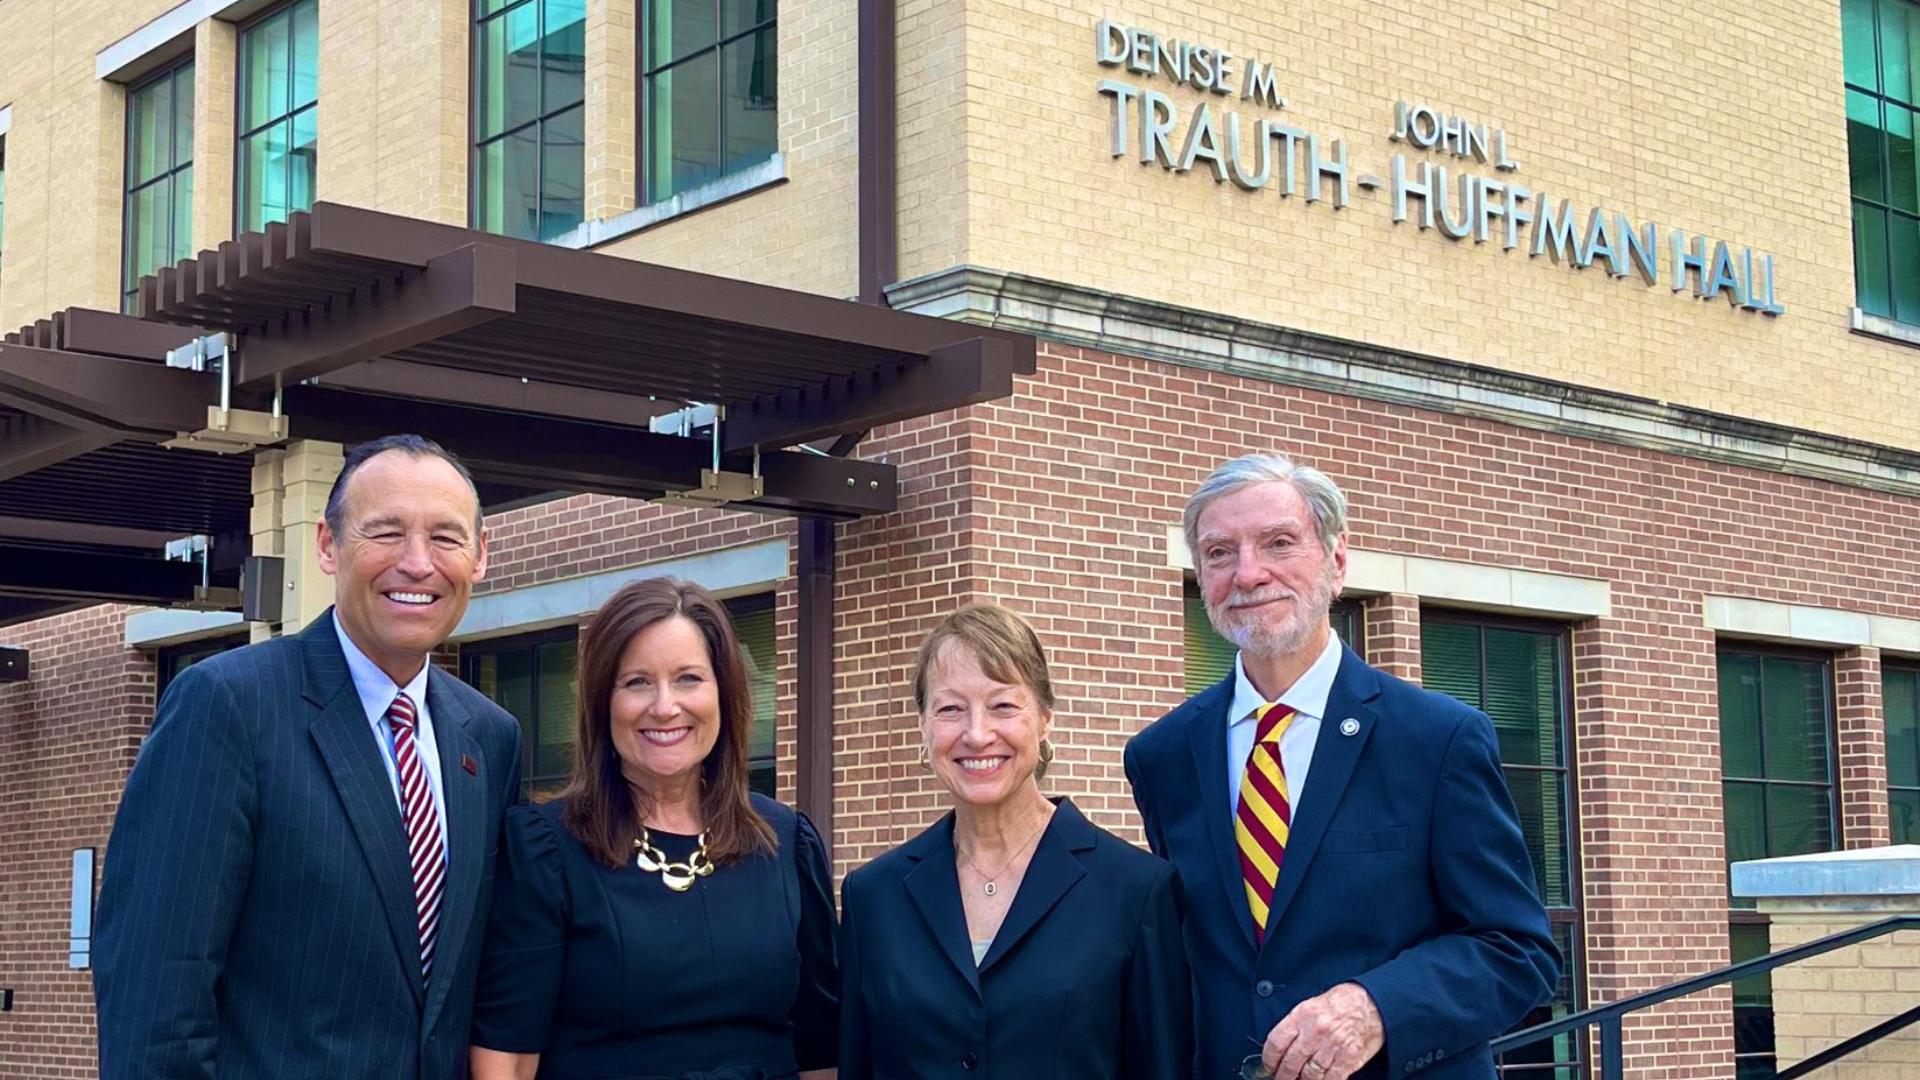 President Damphousse, Beth Damphousse, Denise M. Trauth, and John Huffman Hall take a photo in celebration of the renaming of University Academic Center to Denise M. Trauth and John Huffman Hall.   